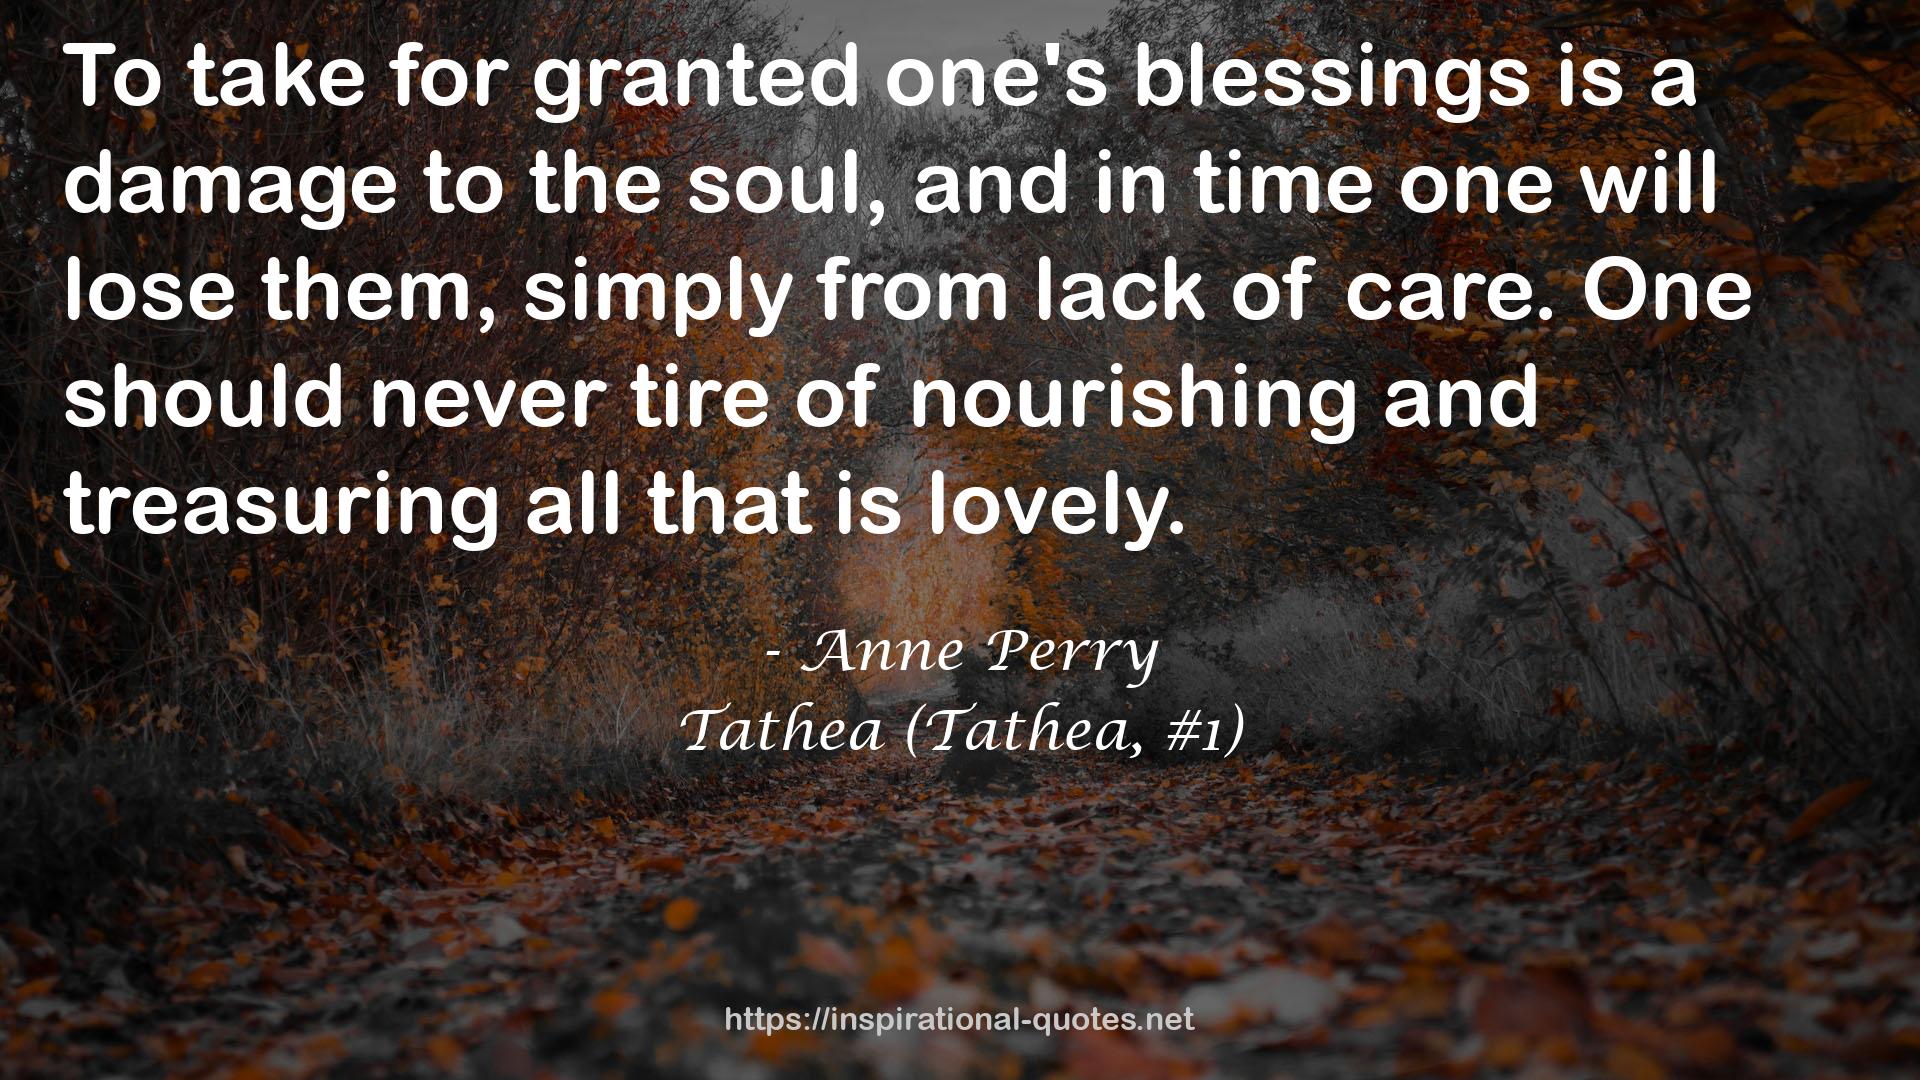 one's blessings  QUOTES